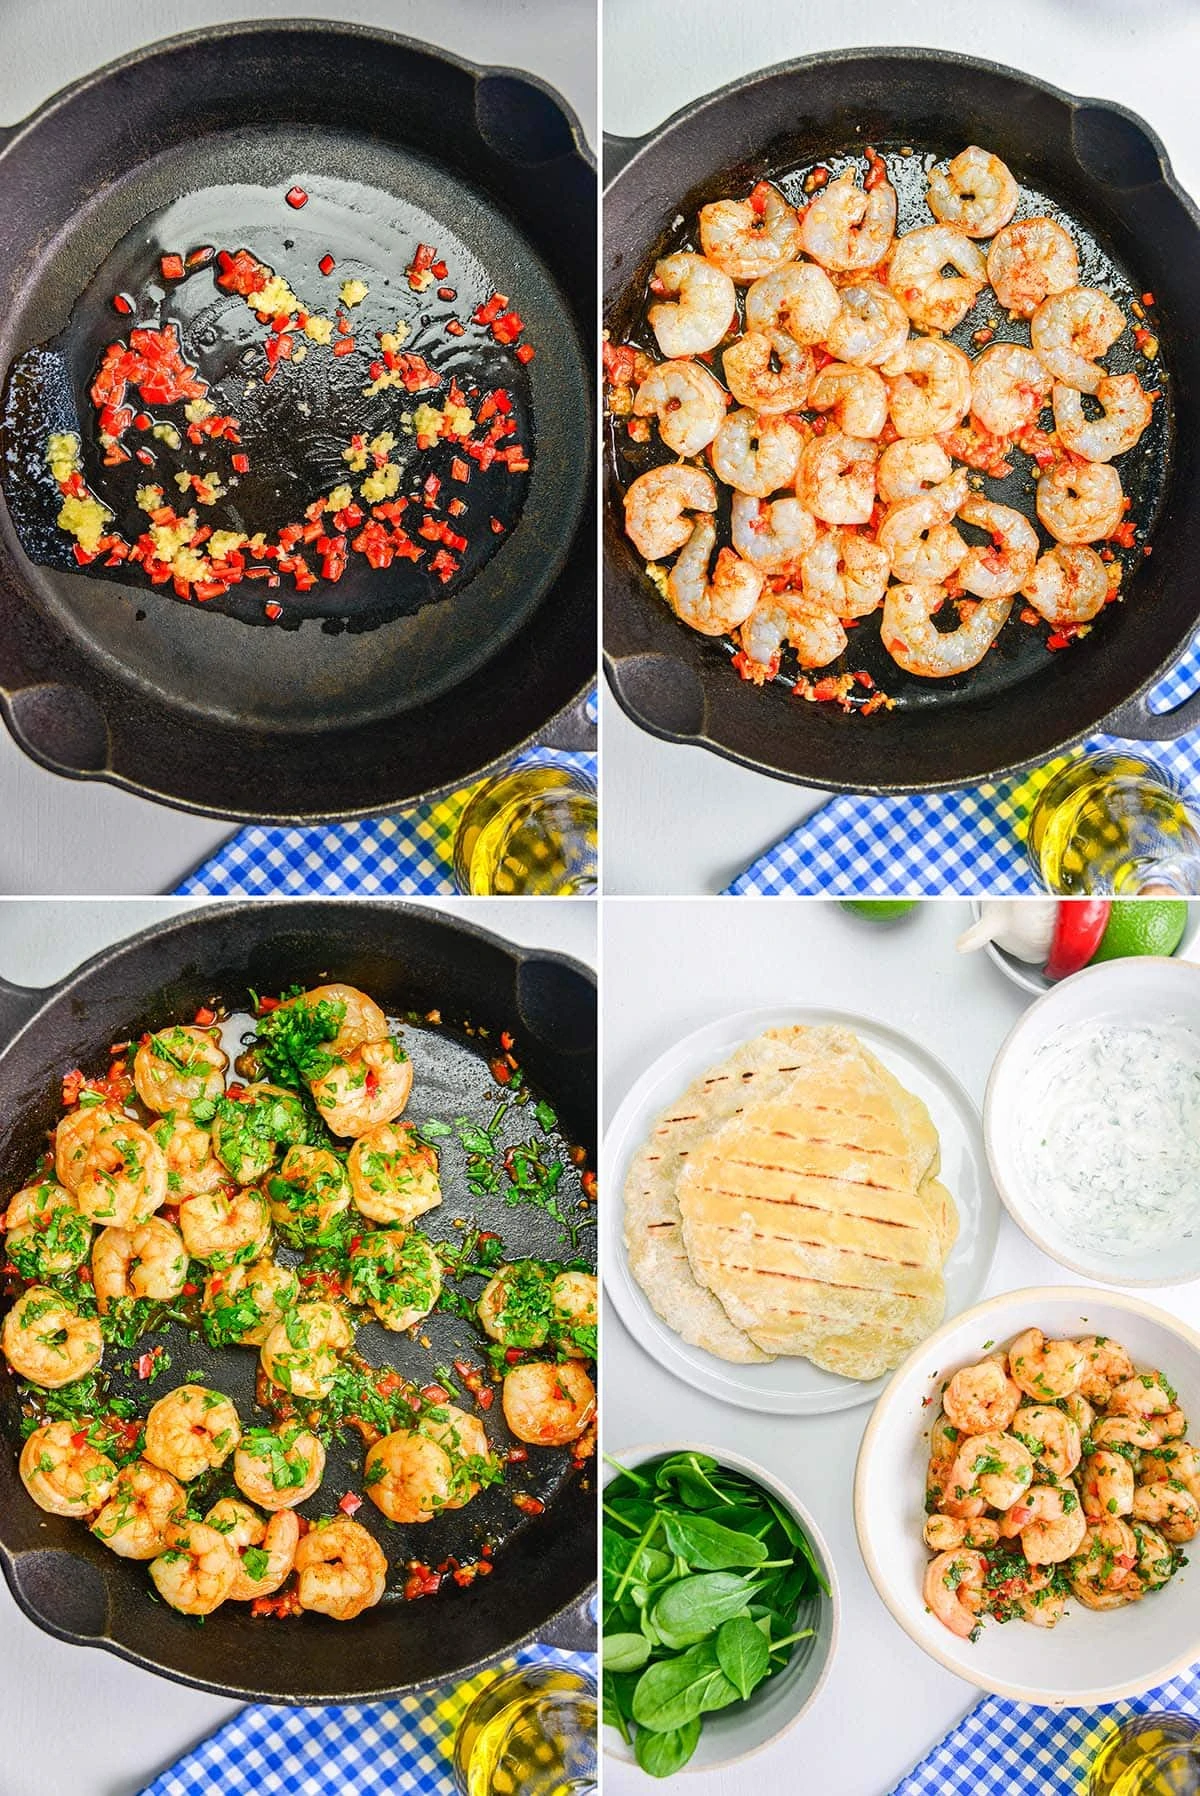 4 image collage showing how to make garlic chilli prawns to serve with flatbreads, spinach and yogurt dip